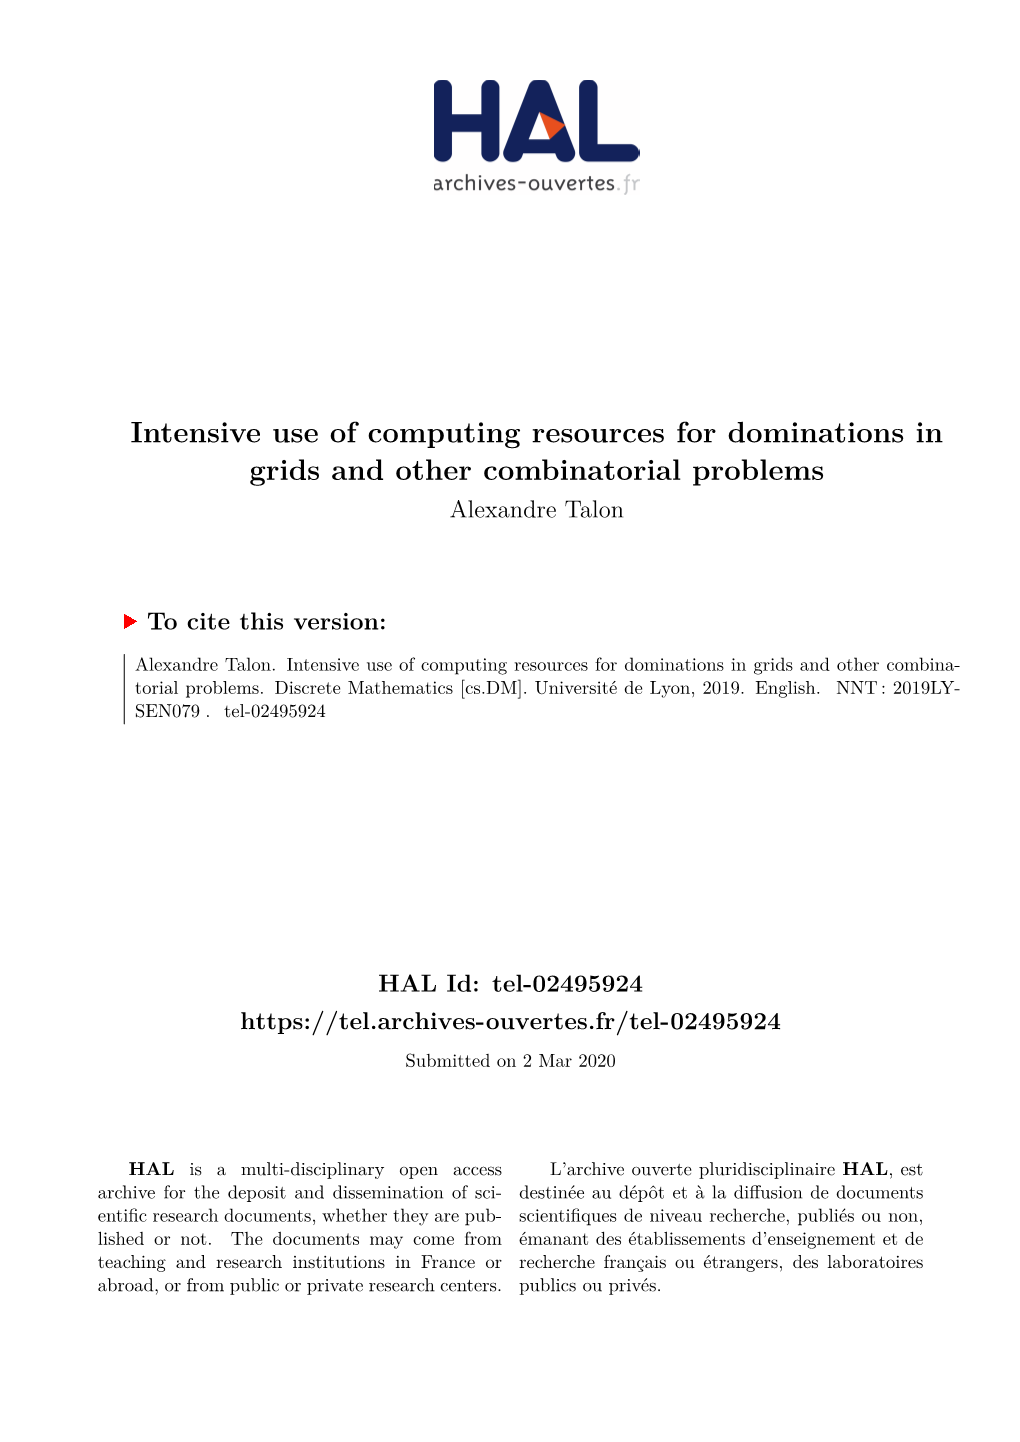 Intensive Use of Computing Resources for Dominations in Grids and Other Combinatorial Problems Alexandre Talon